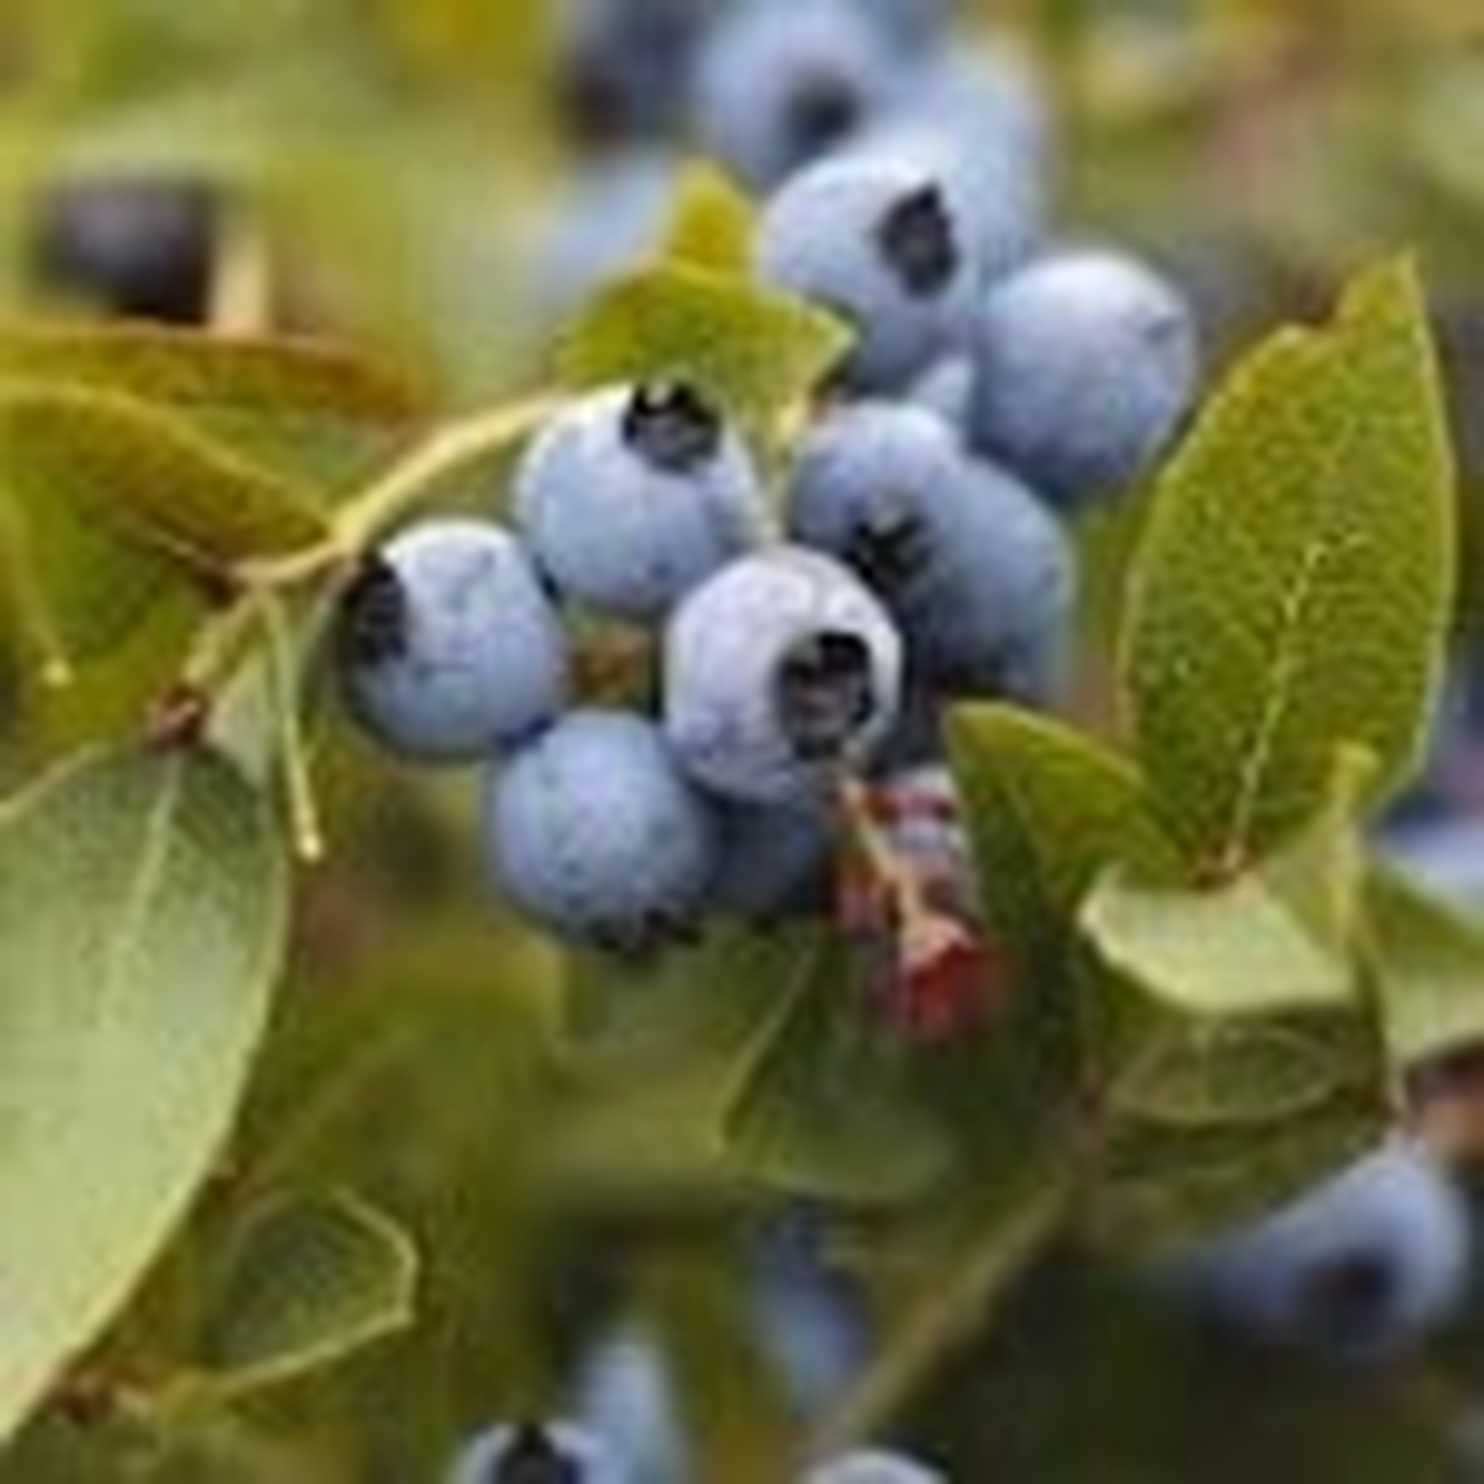 Why schools aren’t businesses: The blueberry story